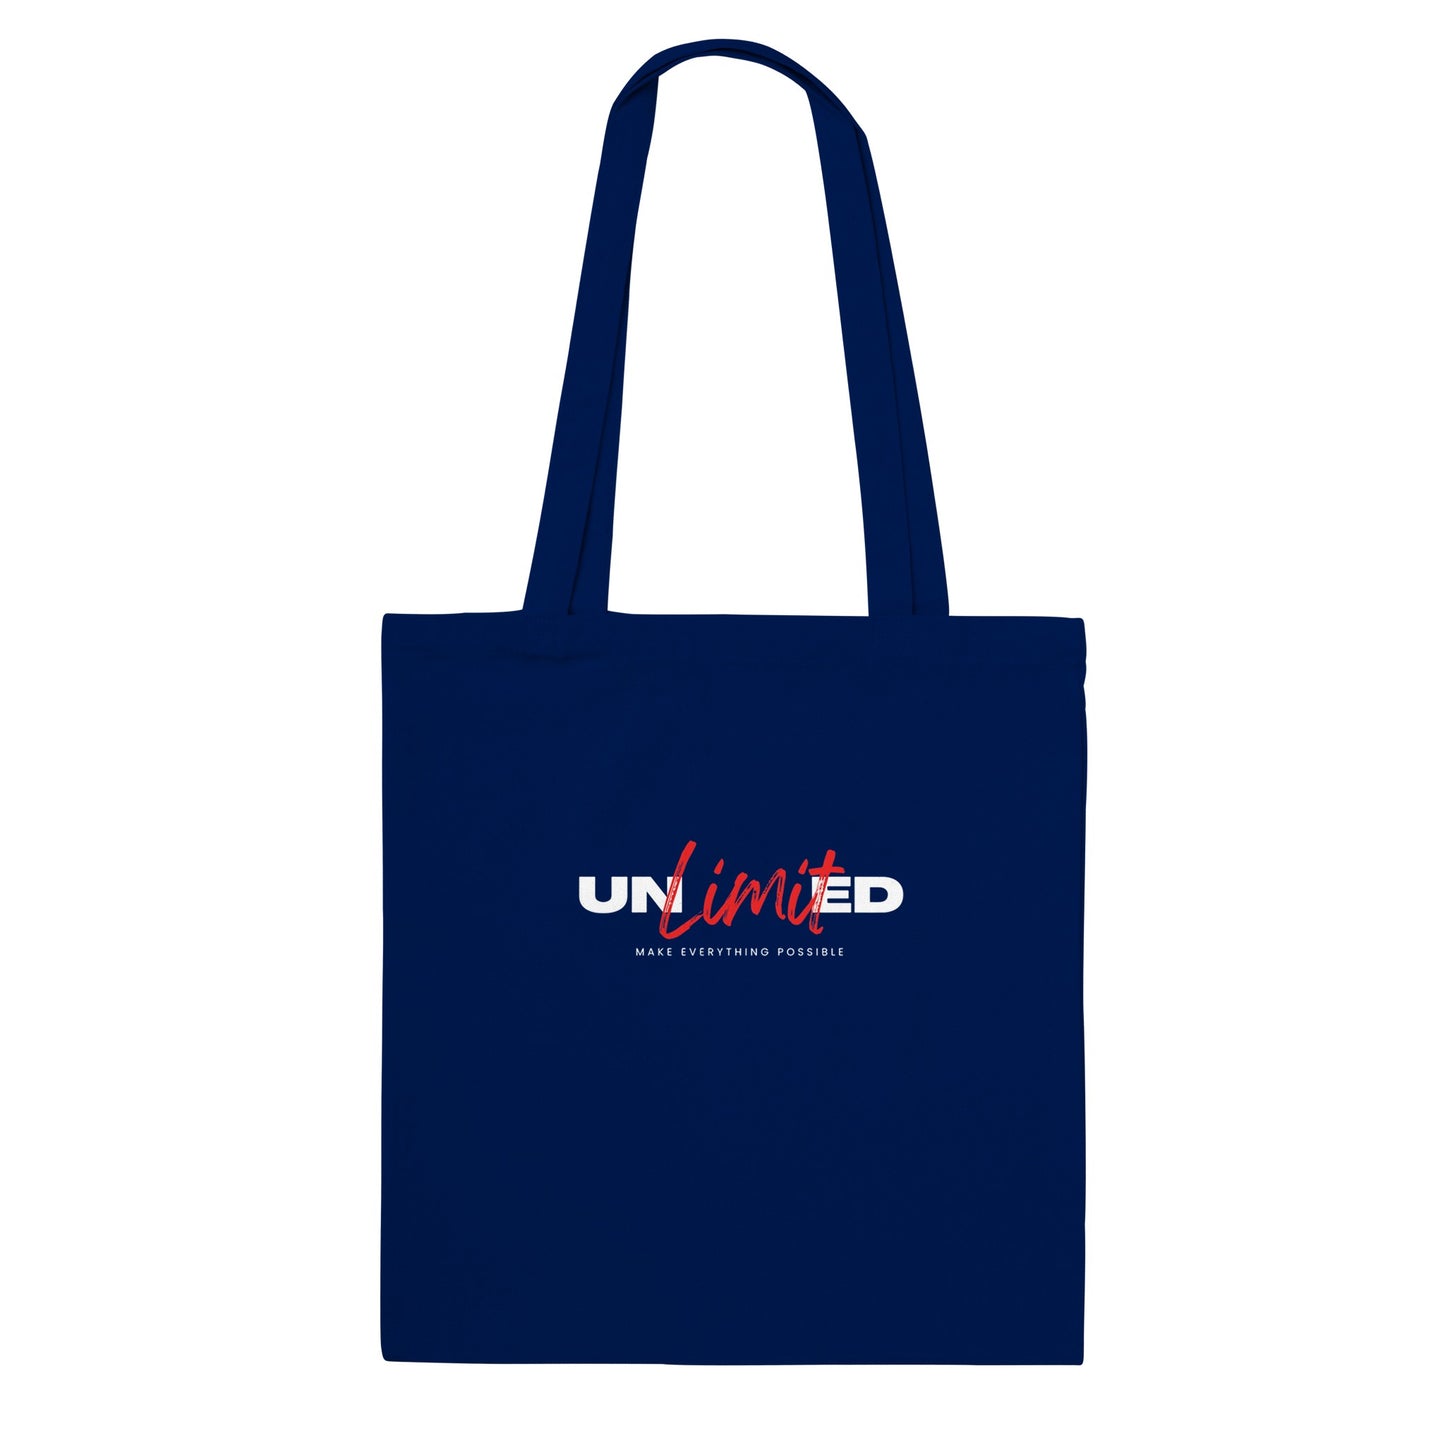 Unlimited: Make Everything Possible - Classic Tote Bag